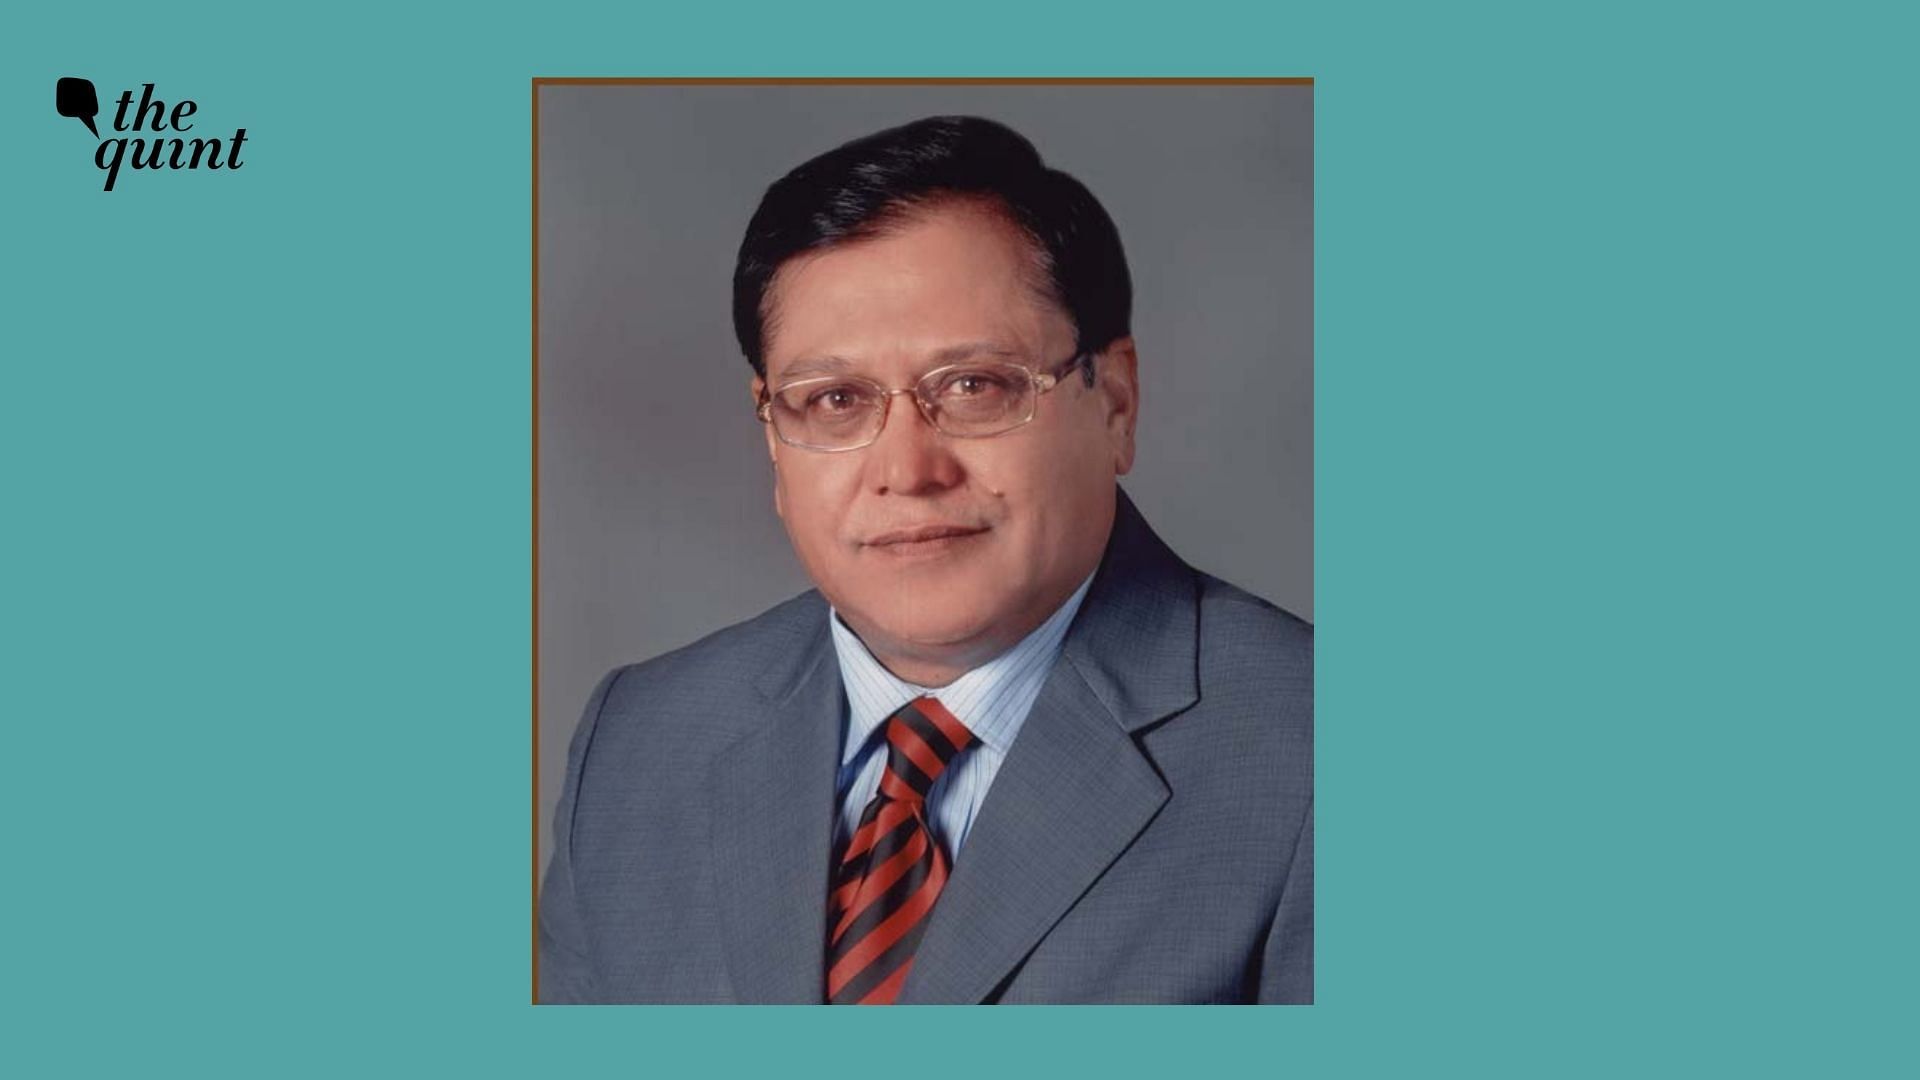 Niti Ayog member VK Saraswat on Friday, 19 March, called the All India Council for Technical Education’s move to not make Mathematics and Physics mandatory for students who want to enrol for engineering courses “disastrous”.